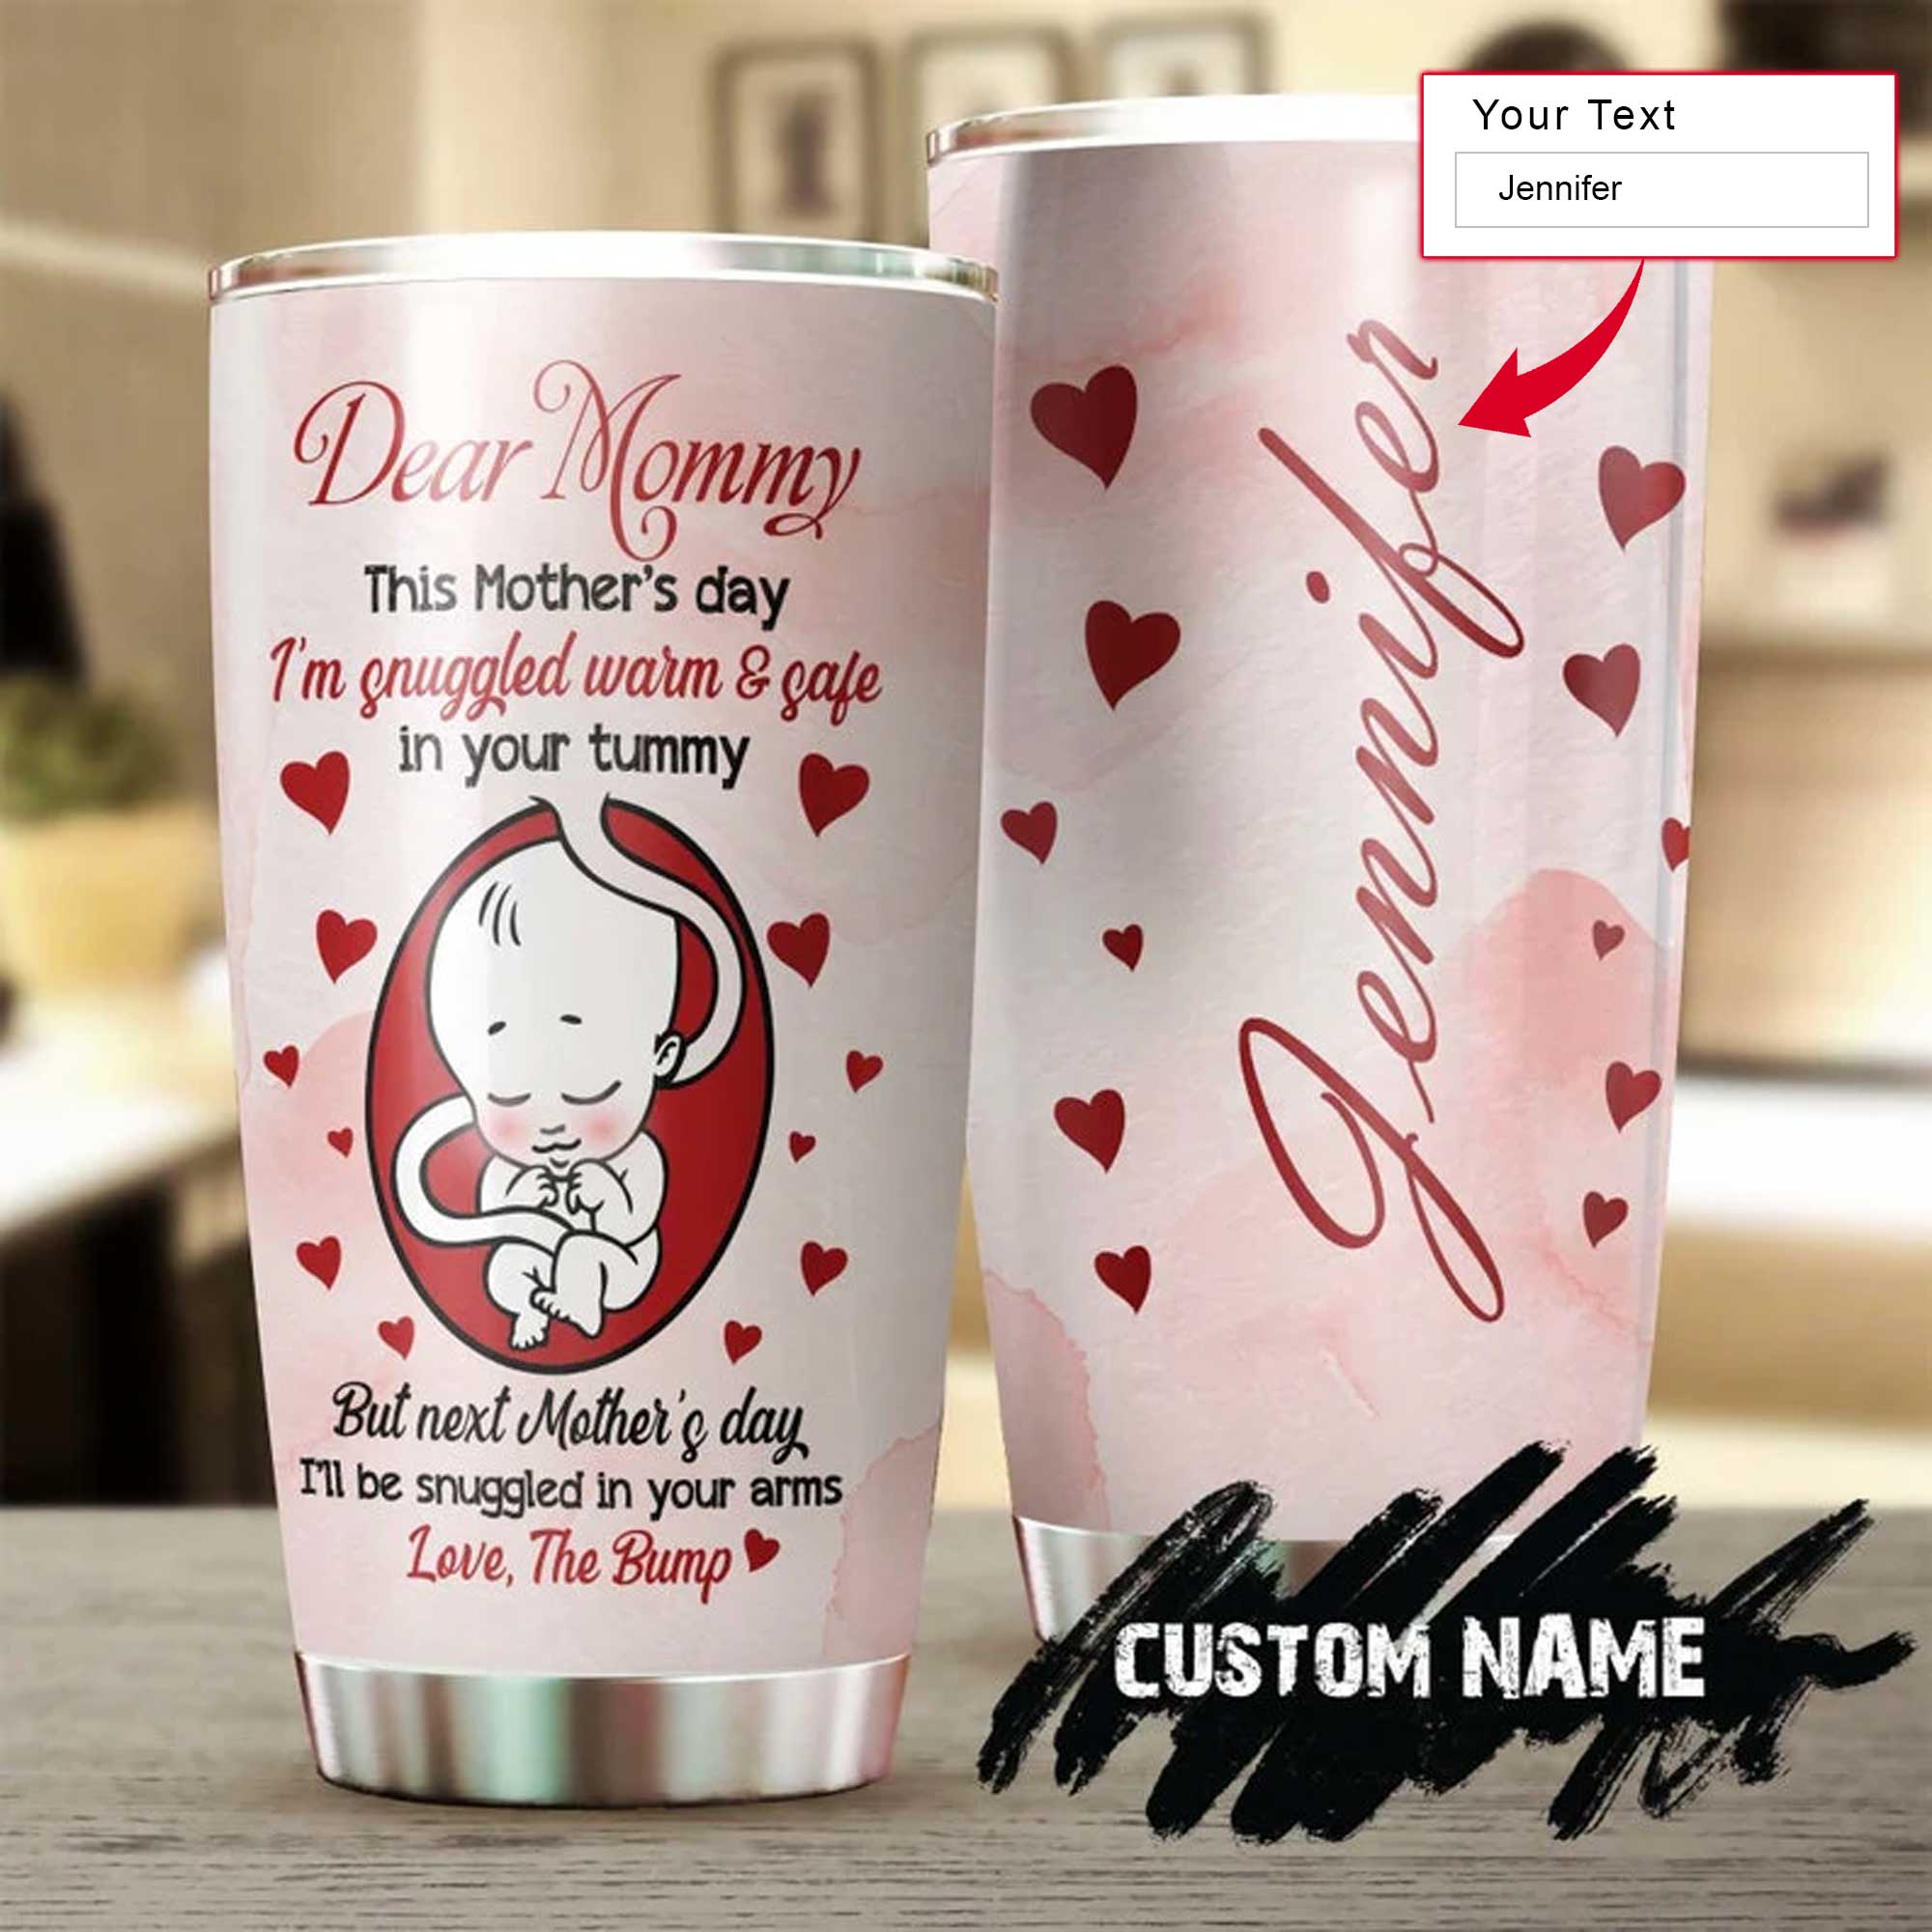 Personalized Mother's Day Gift Tumbler - Custom Gift For Mother's Day, Presents For Mom From Daughter Son - Baby Snuggle In Your Tummy Tumbler